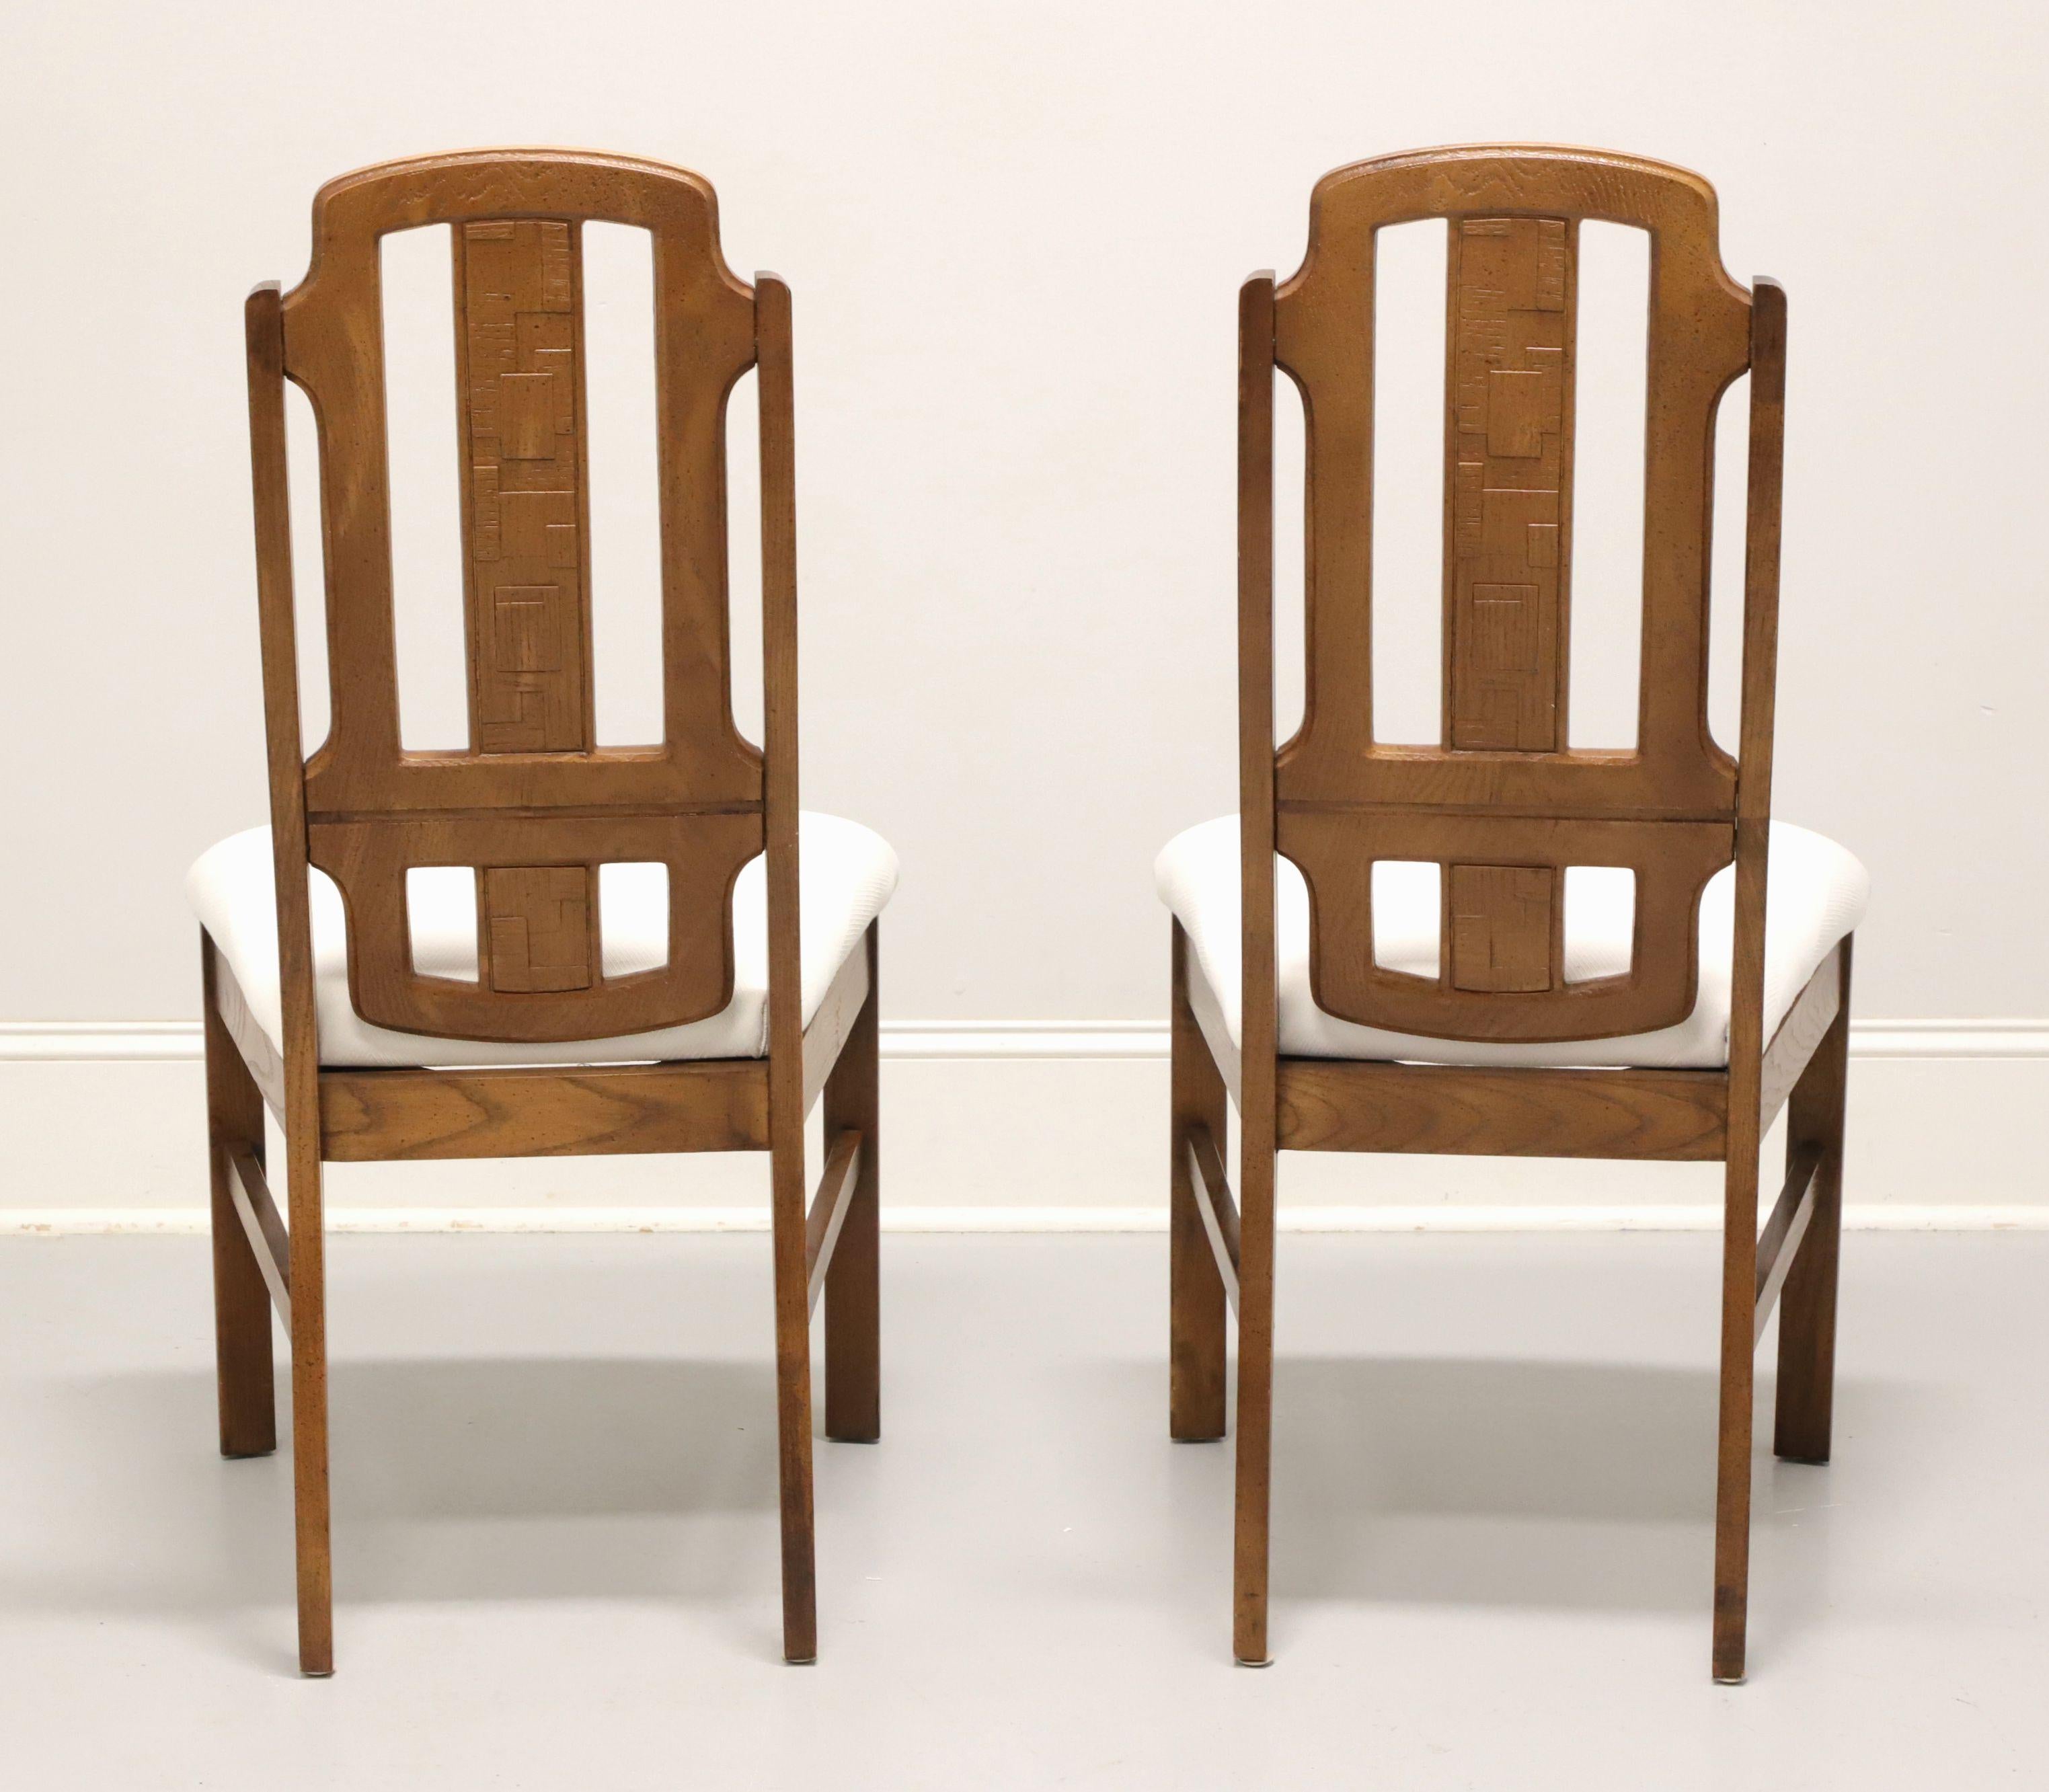 Fabric BROYHILL PREMIER Mid 20th Century Oak Brutalist Style Dining Side Chairs -Pair B For Sale